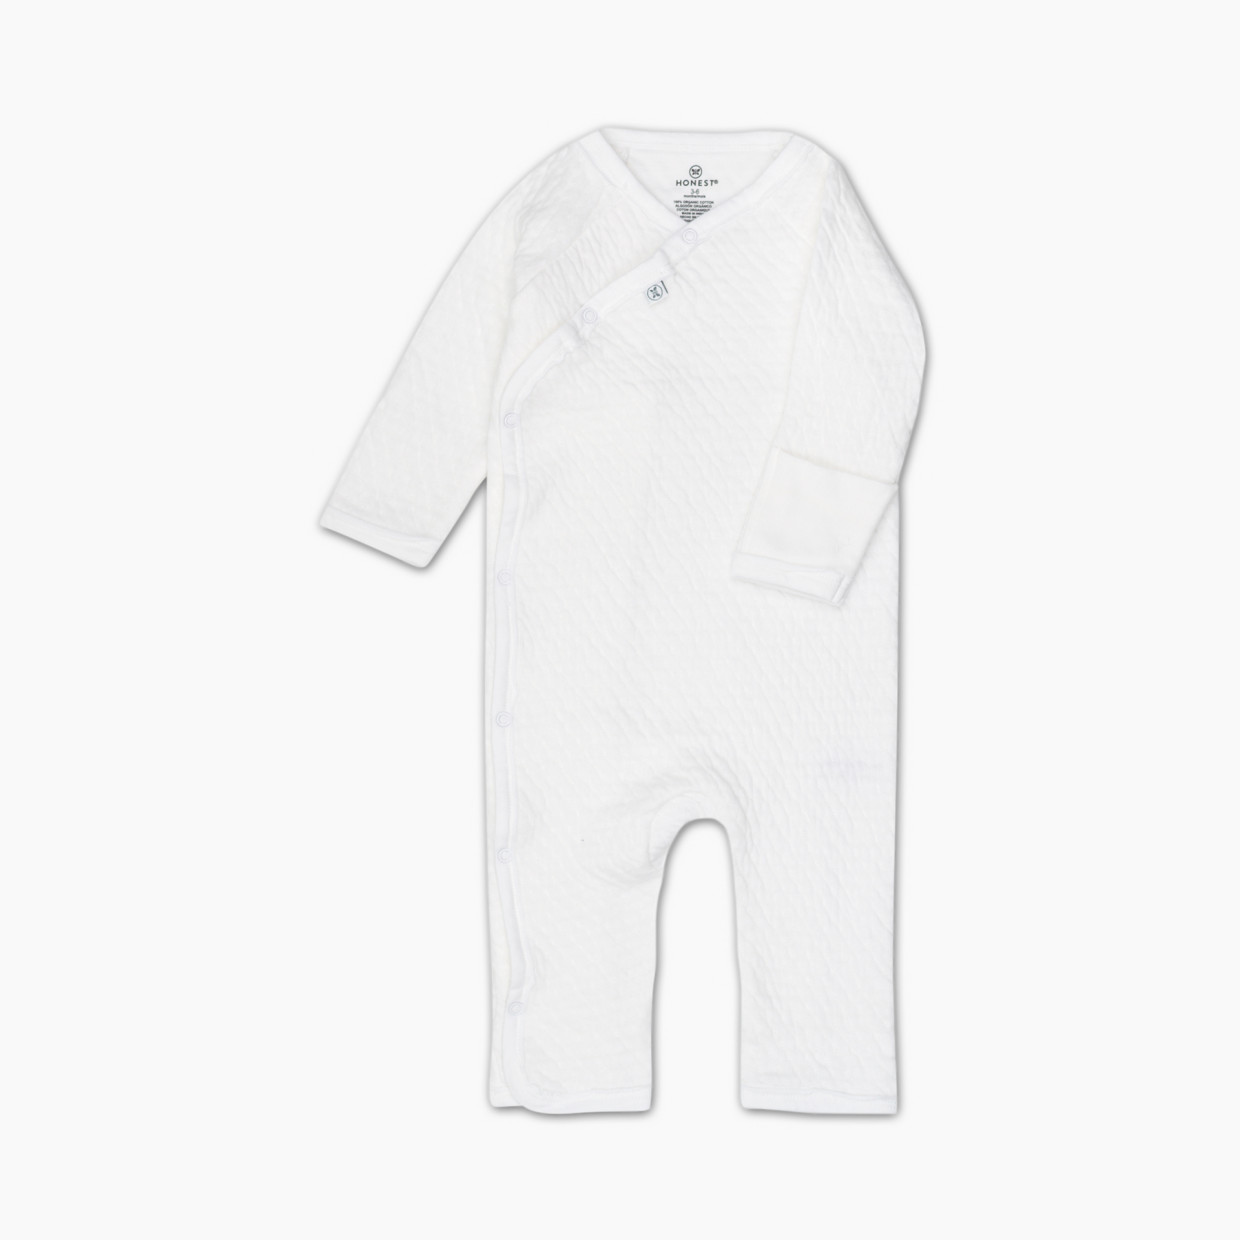 Honest Baby Clothing Organic Cotton Matelasse Side Snap Coverall - Bright White, 3-6 M.